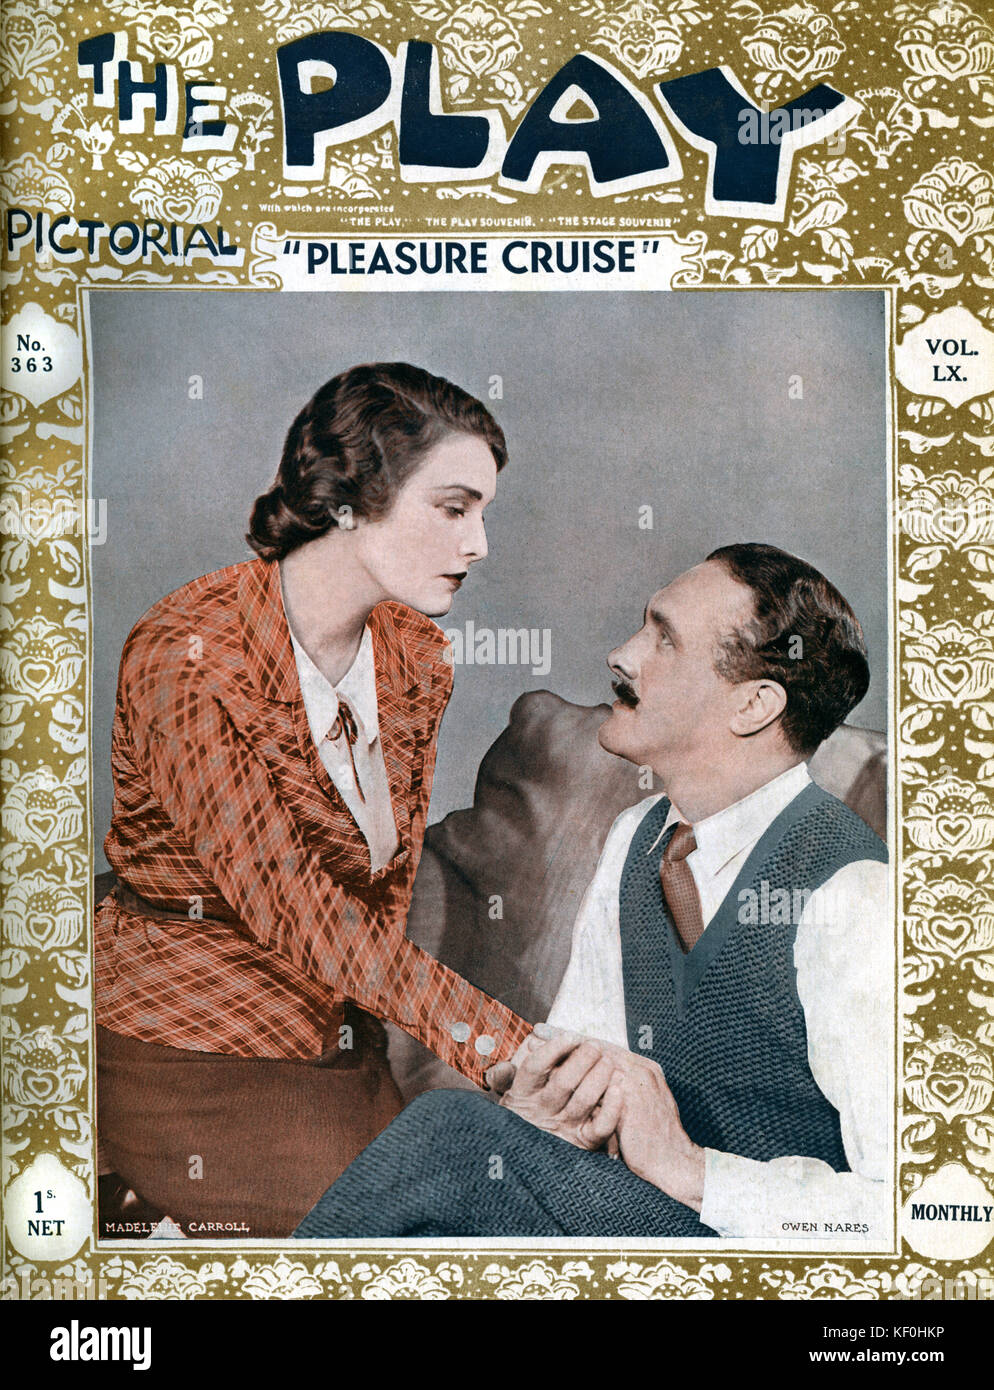 'Pleasure Cruise' by Austen Allen, with Madeleine Carroll (26 February 1906 – 2 October 1987) and Owen Nares (11 August 1888 - 30 July 1943). A London production at the Apollo Theatre, 26 April 1932. Cover of Play Pictorial, 1932. Stock Photo